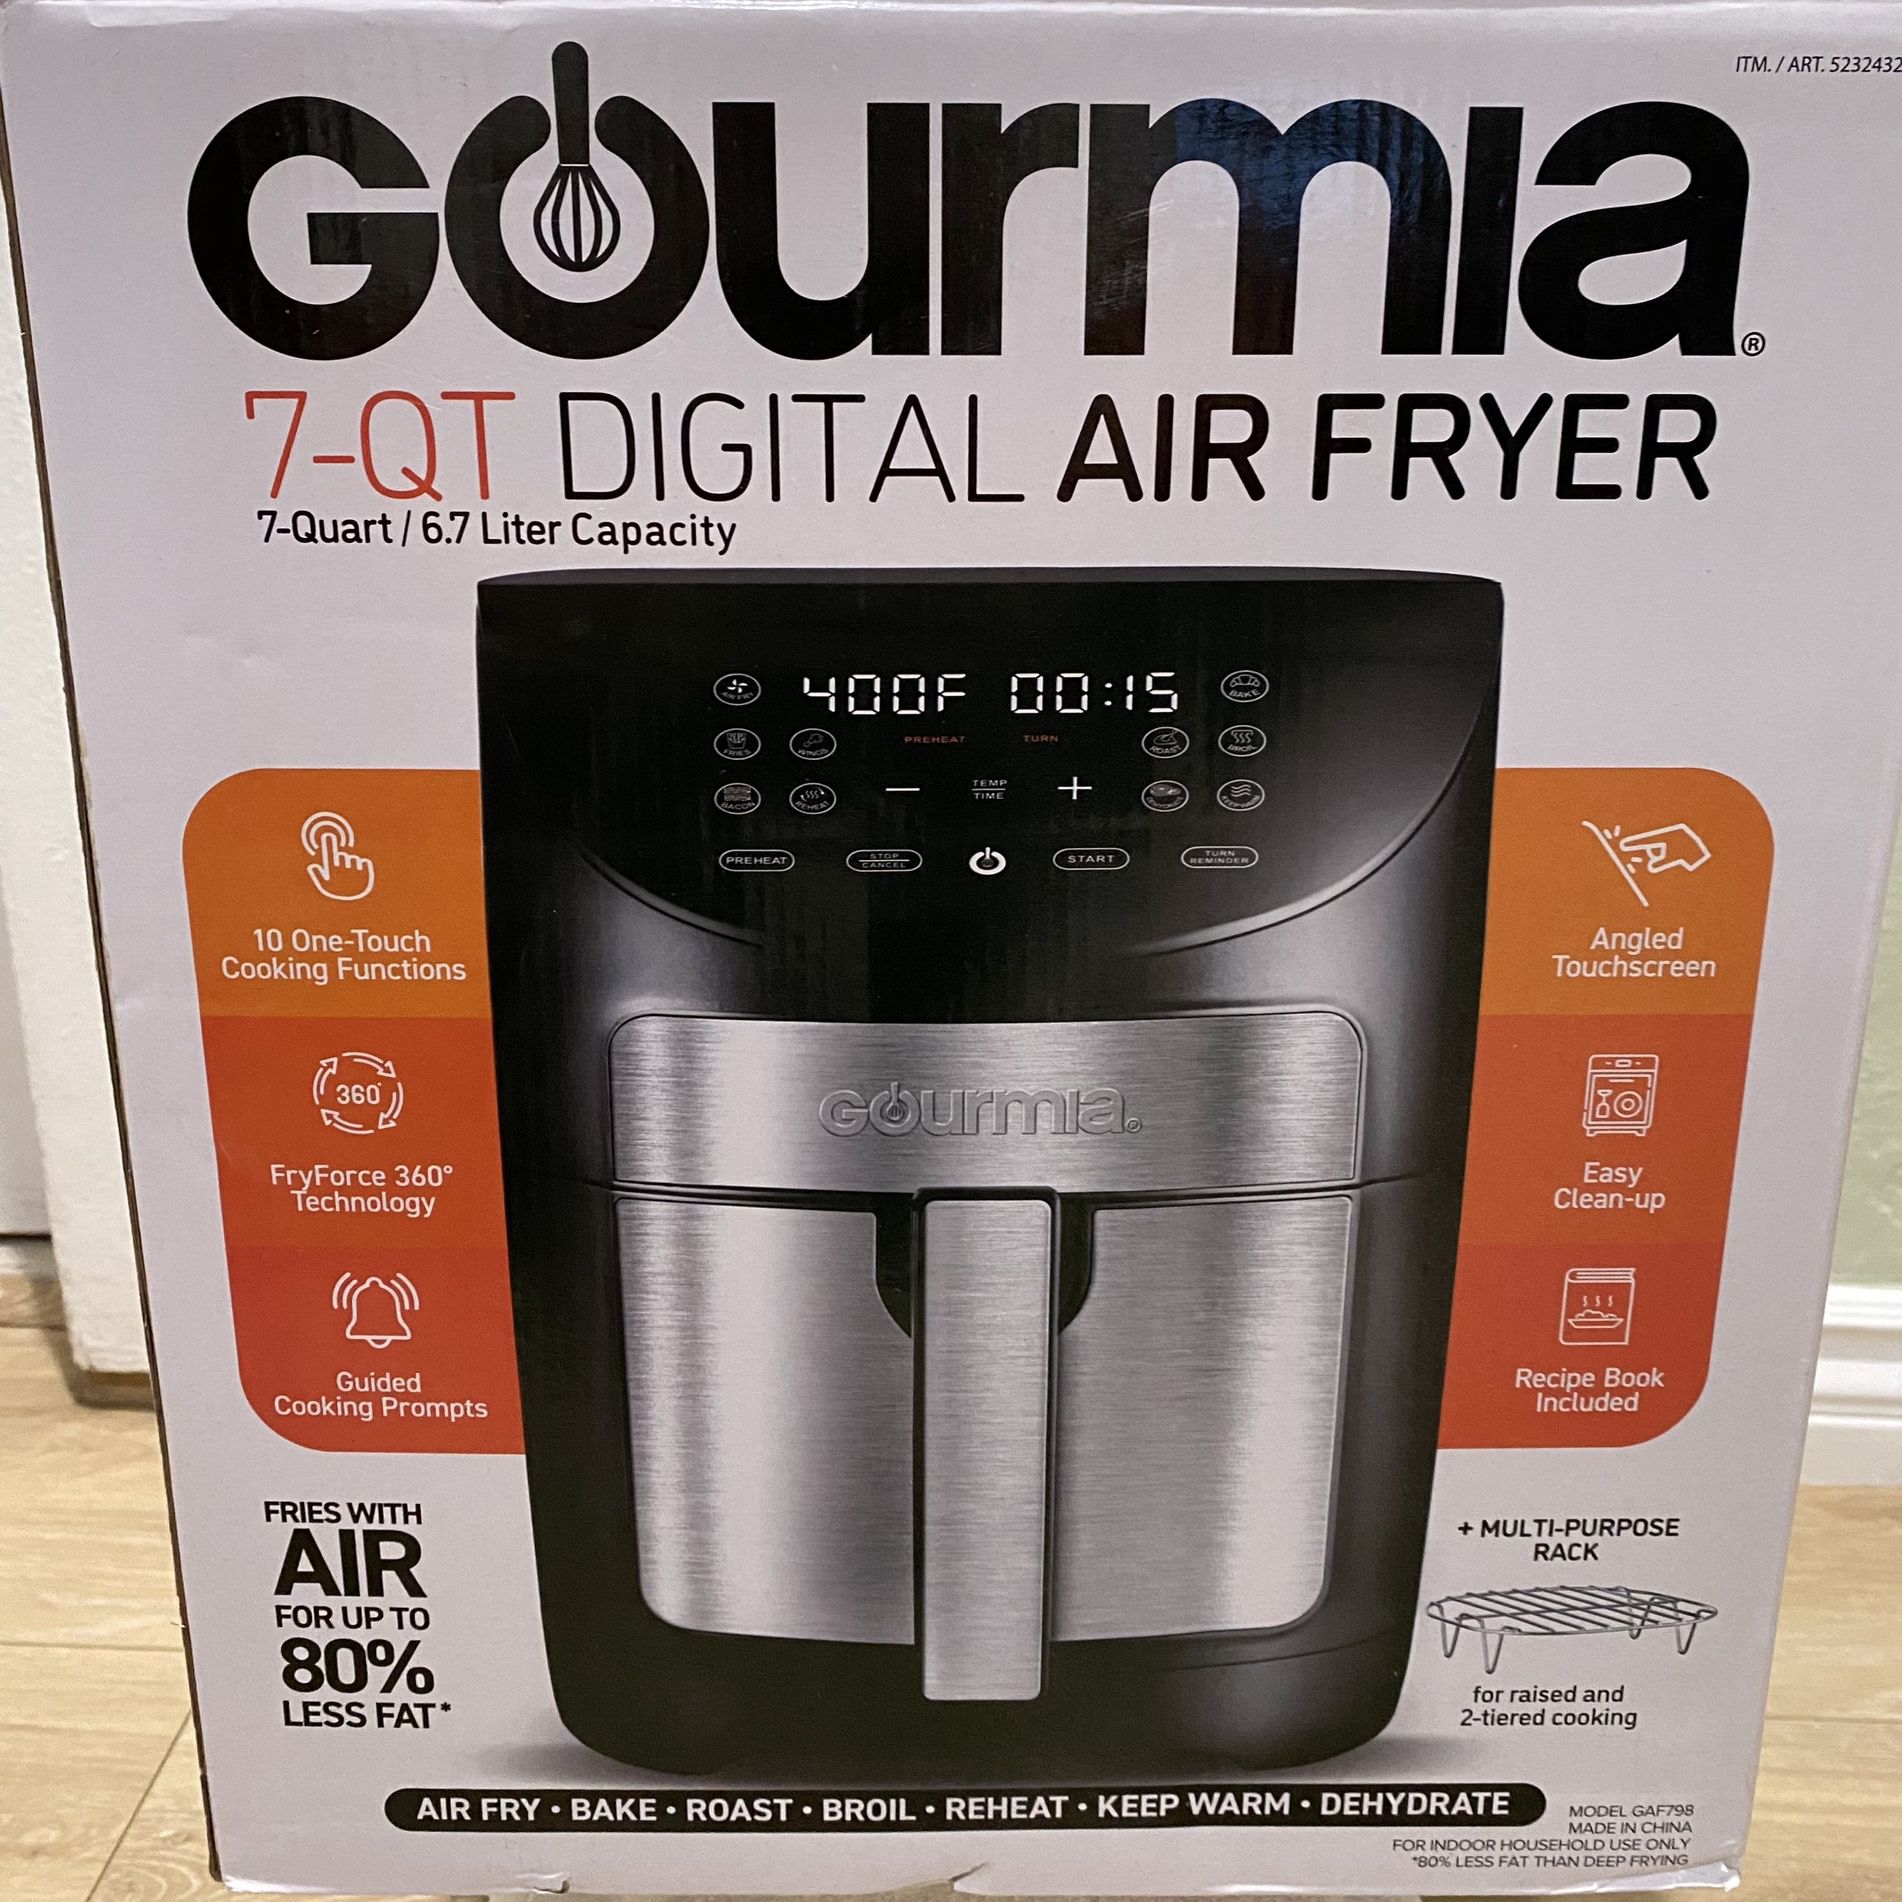 This hi-tech Gourmia air fryer is 50% off right now